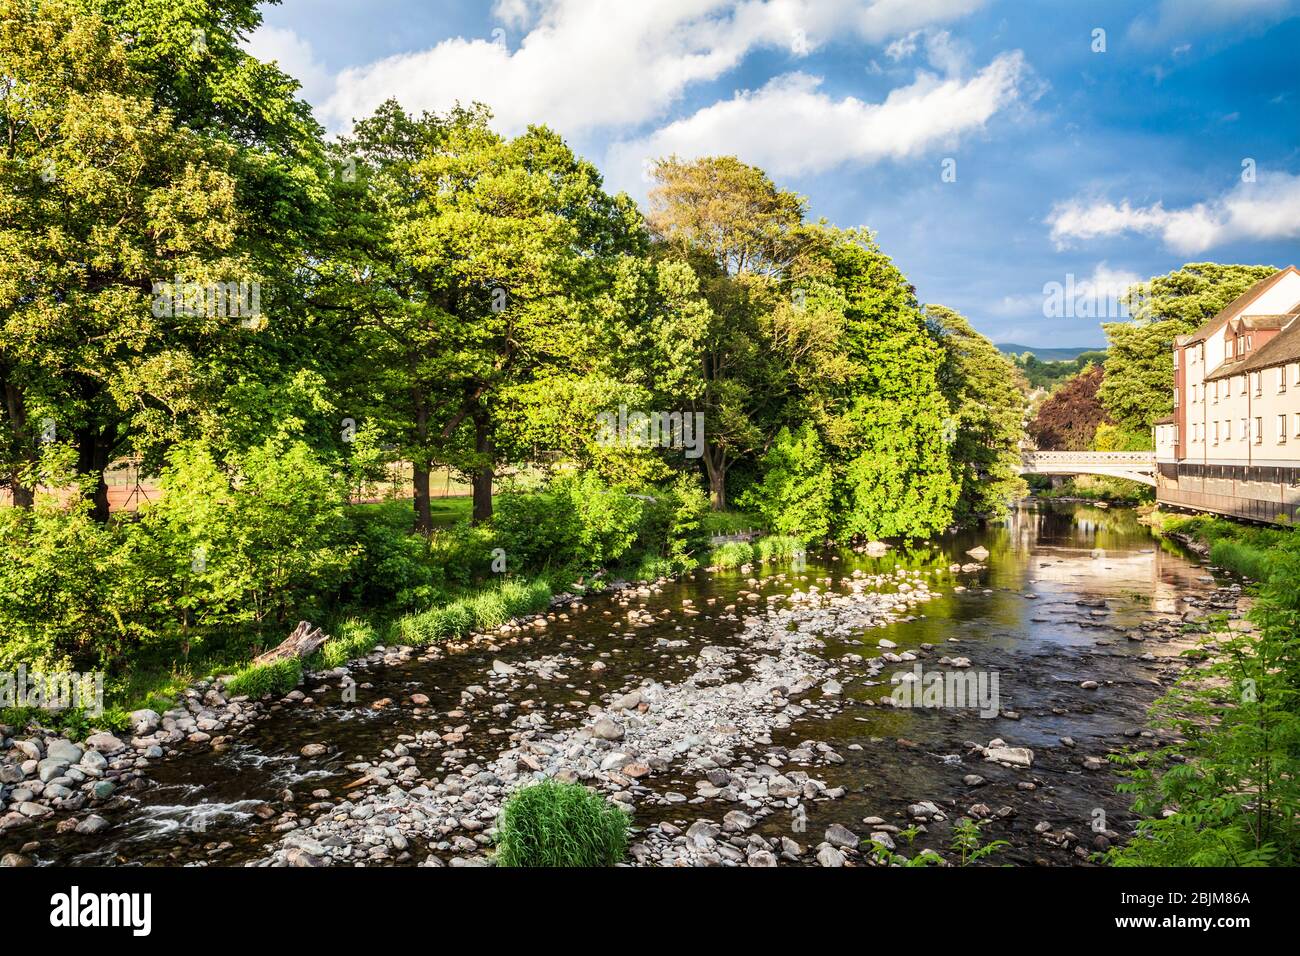 The River Greta, a tributary of the River Derwent, flowing through Keswick. Stock Photo